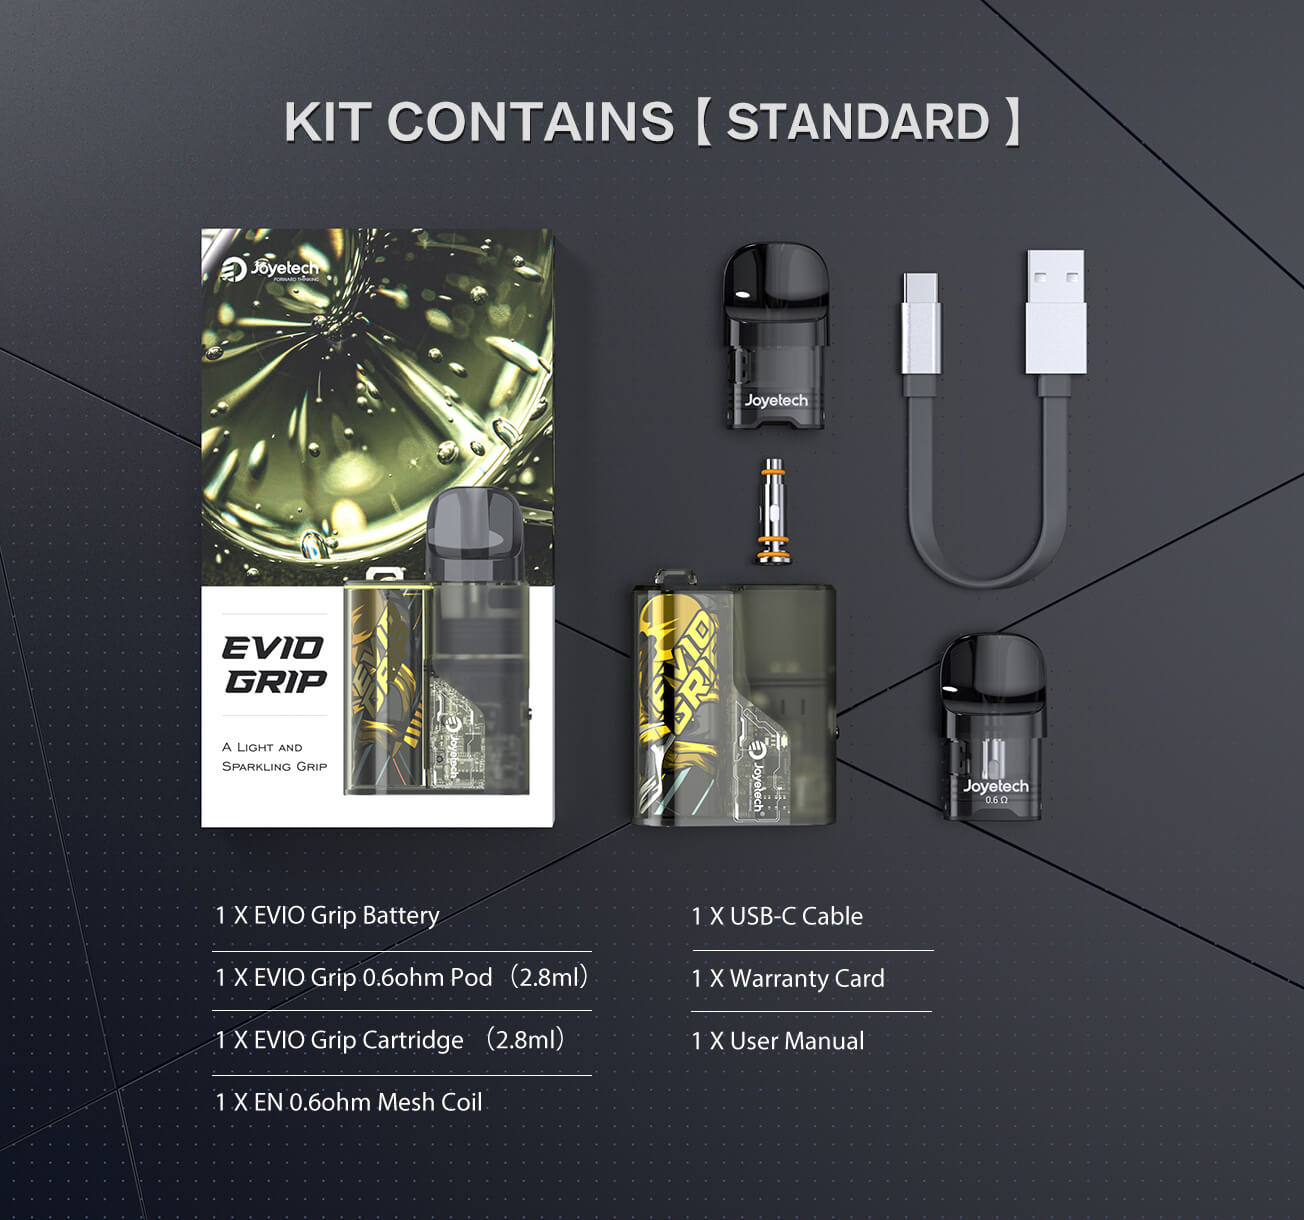 KIT CONTAINS (STANDARD)